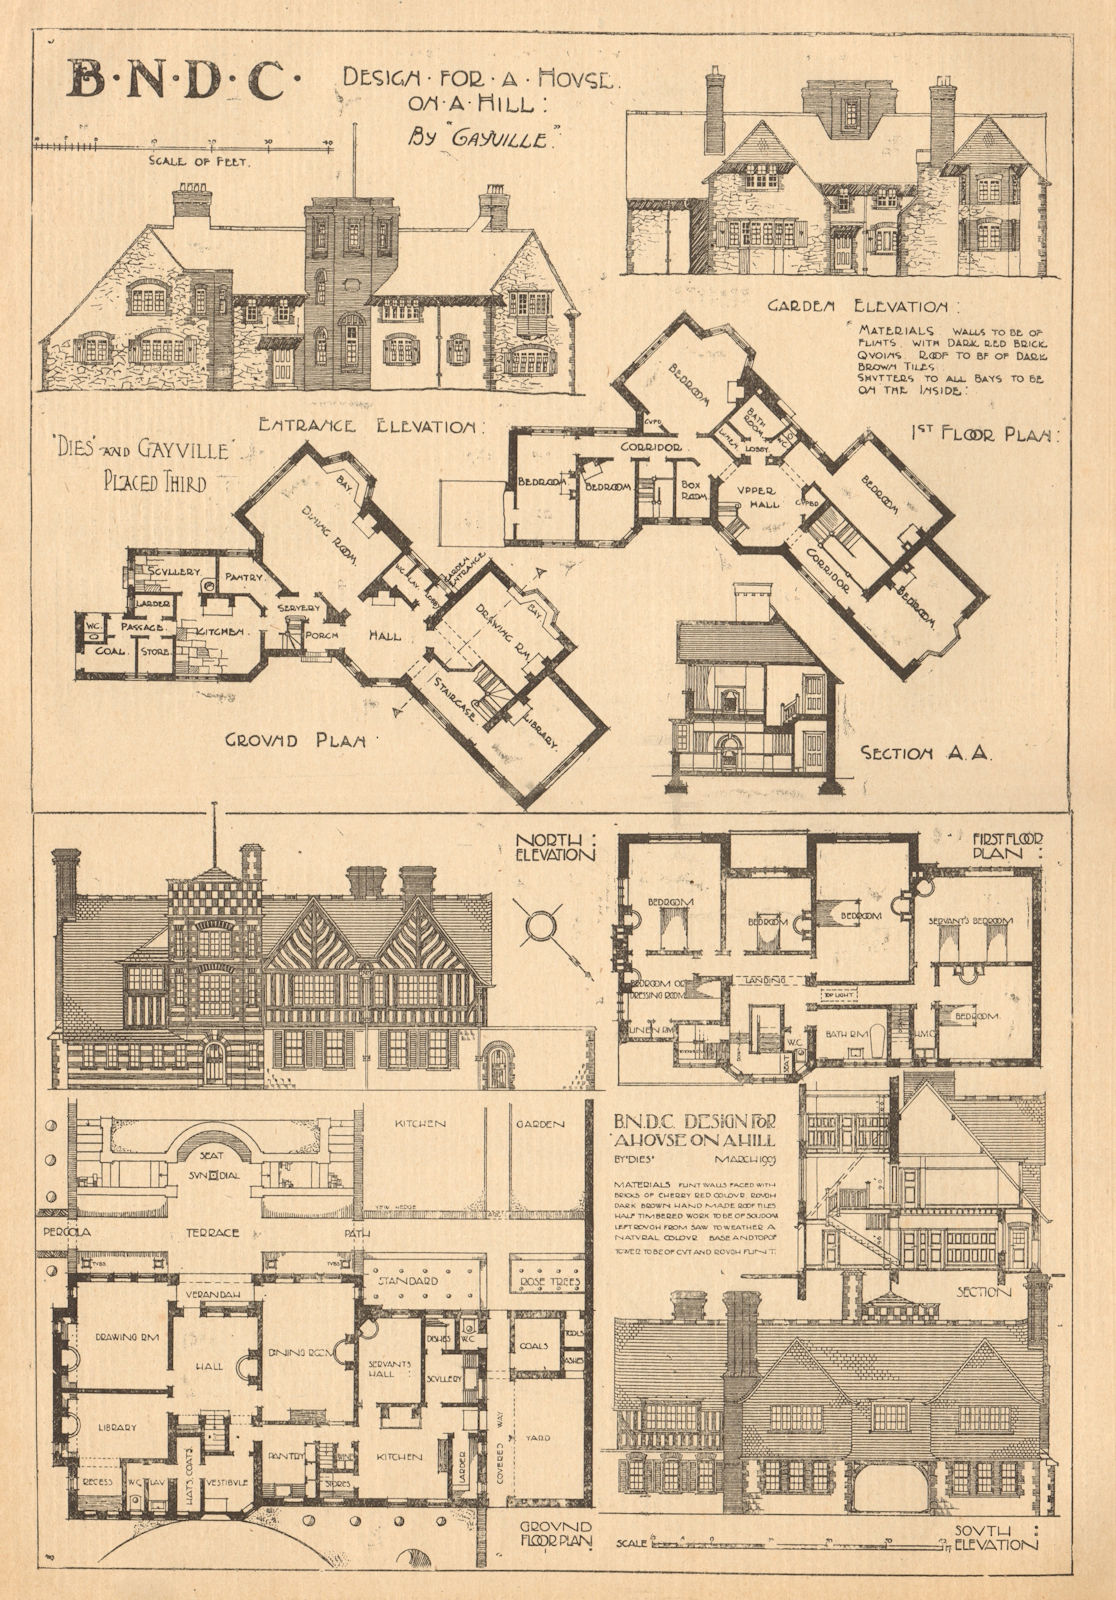 Designs for a house on a hill by Gayville & Dies. Elevations & plans 1905